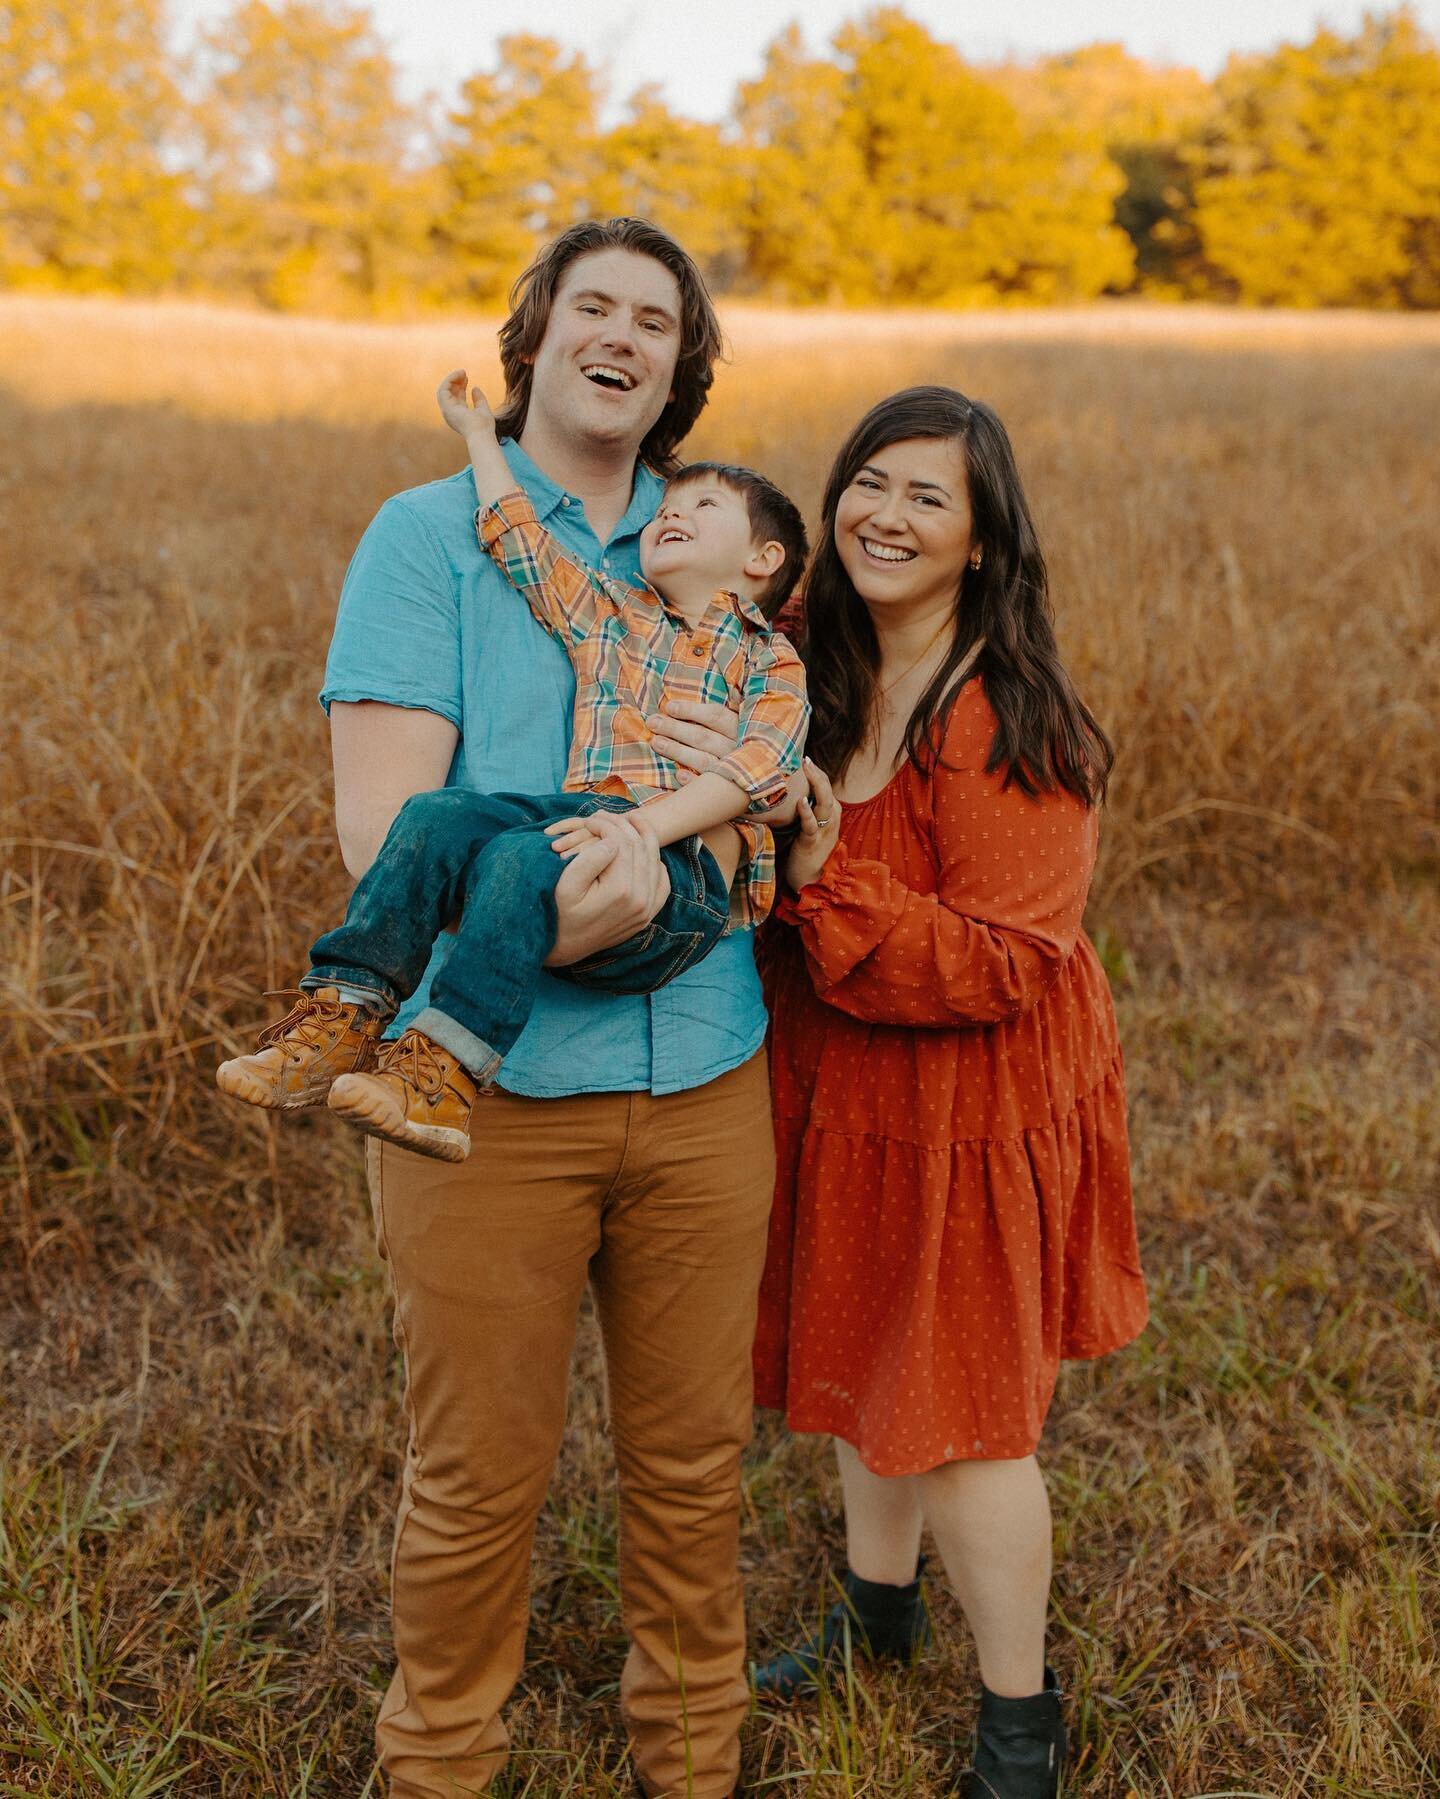 Finally out from behind the camera thanks to @mrs.hannahhanson 🤩 Thank you so much for capturing our family and little wild child🦊✨
.
#mckinneyfamilyphotographer #mckinneymoms #friscomoms #dfwphotographer